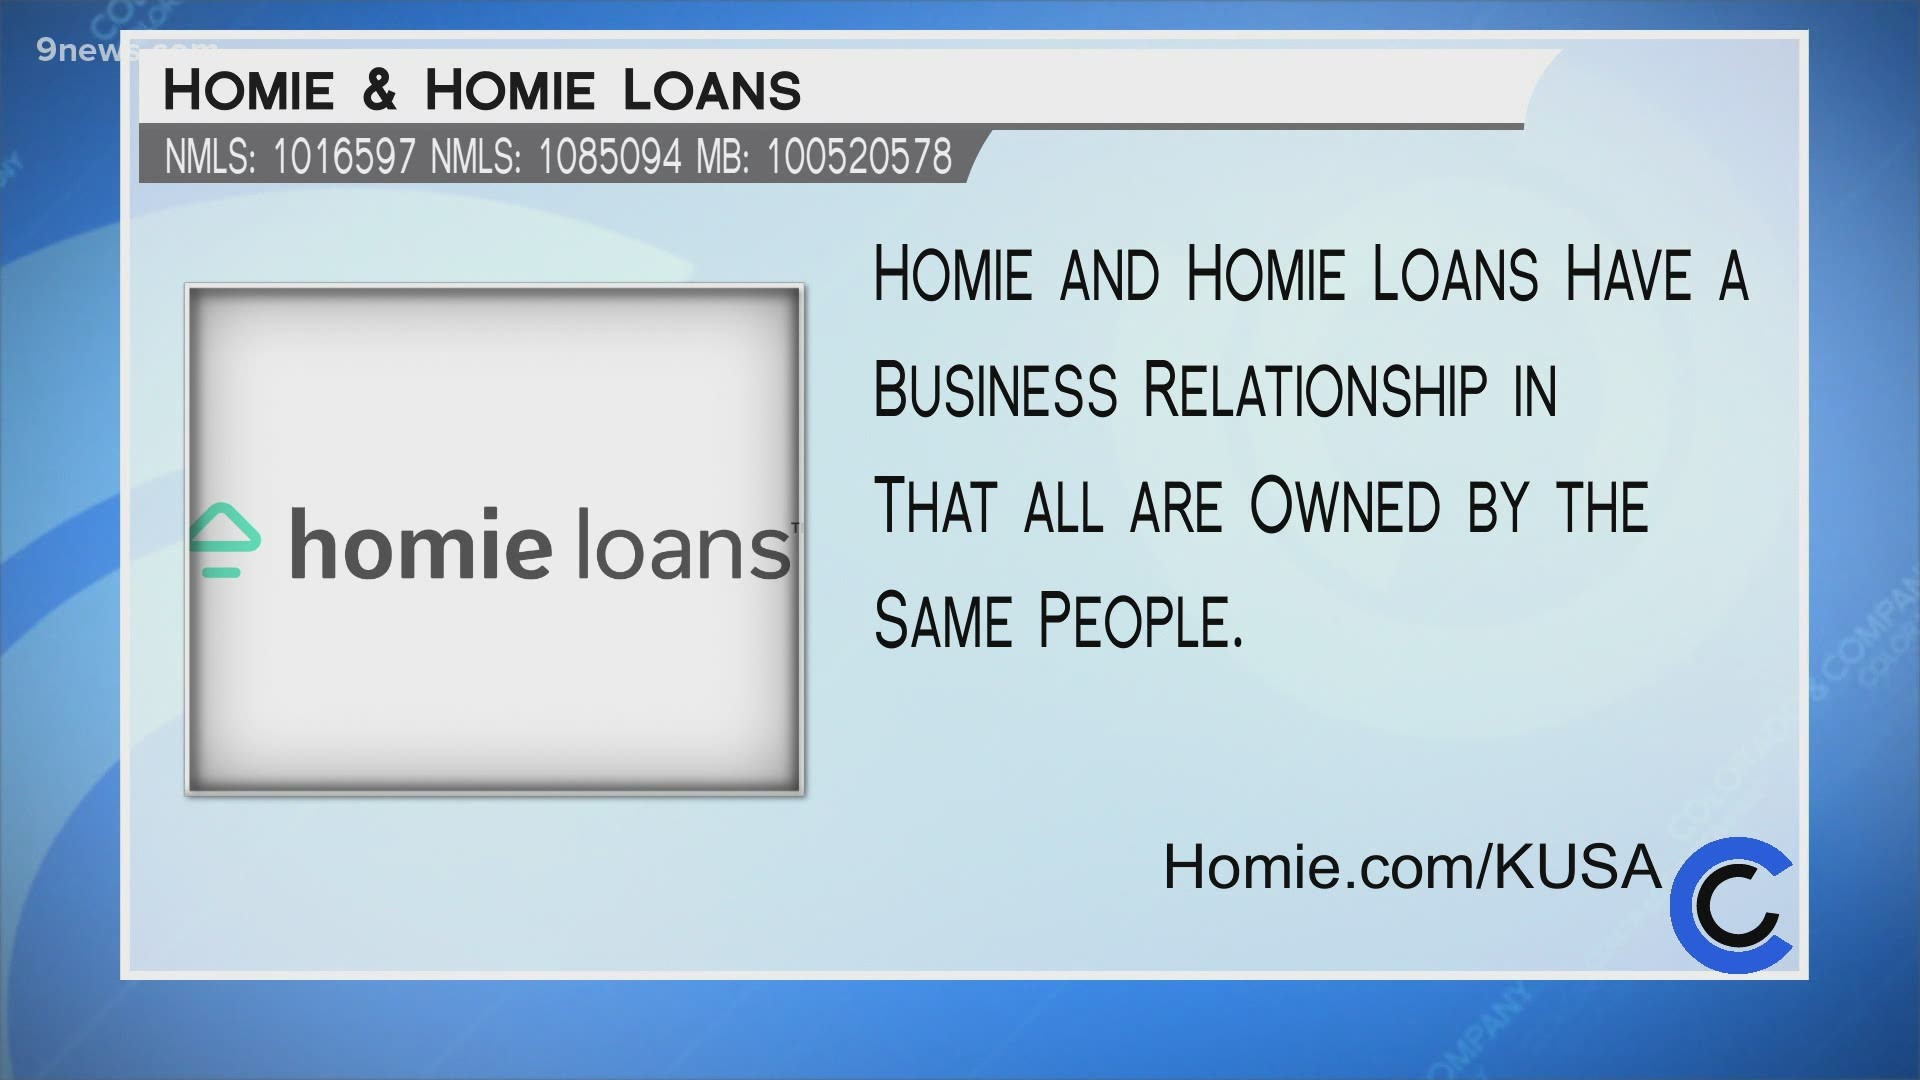 Homie saves you thousands of dollars and can help you get into the home of your dreams. Learn more at Homie.com/KUSA.